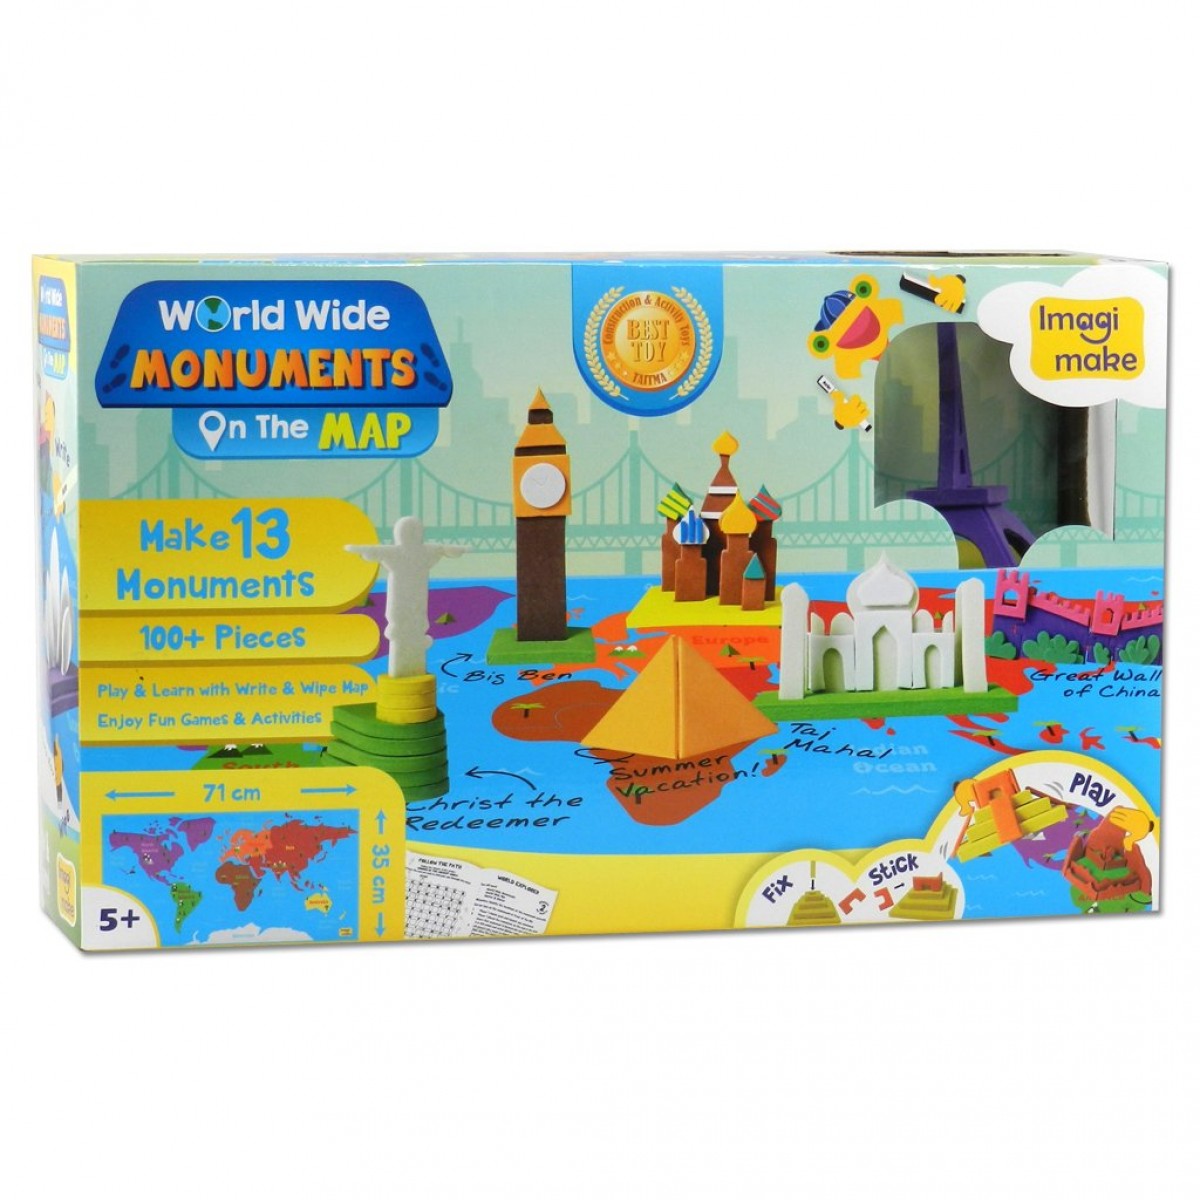 Imagimake World Wide Monuments On The Map DIY Art & Craft Kit for Kids age 5Y+ 